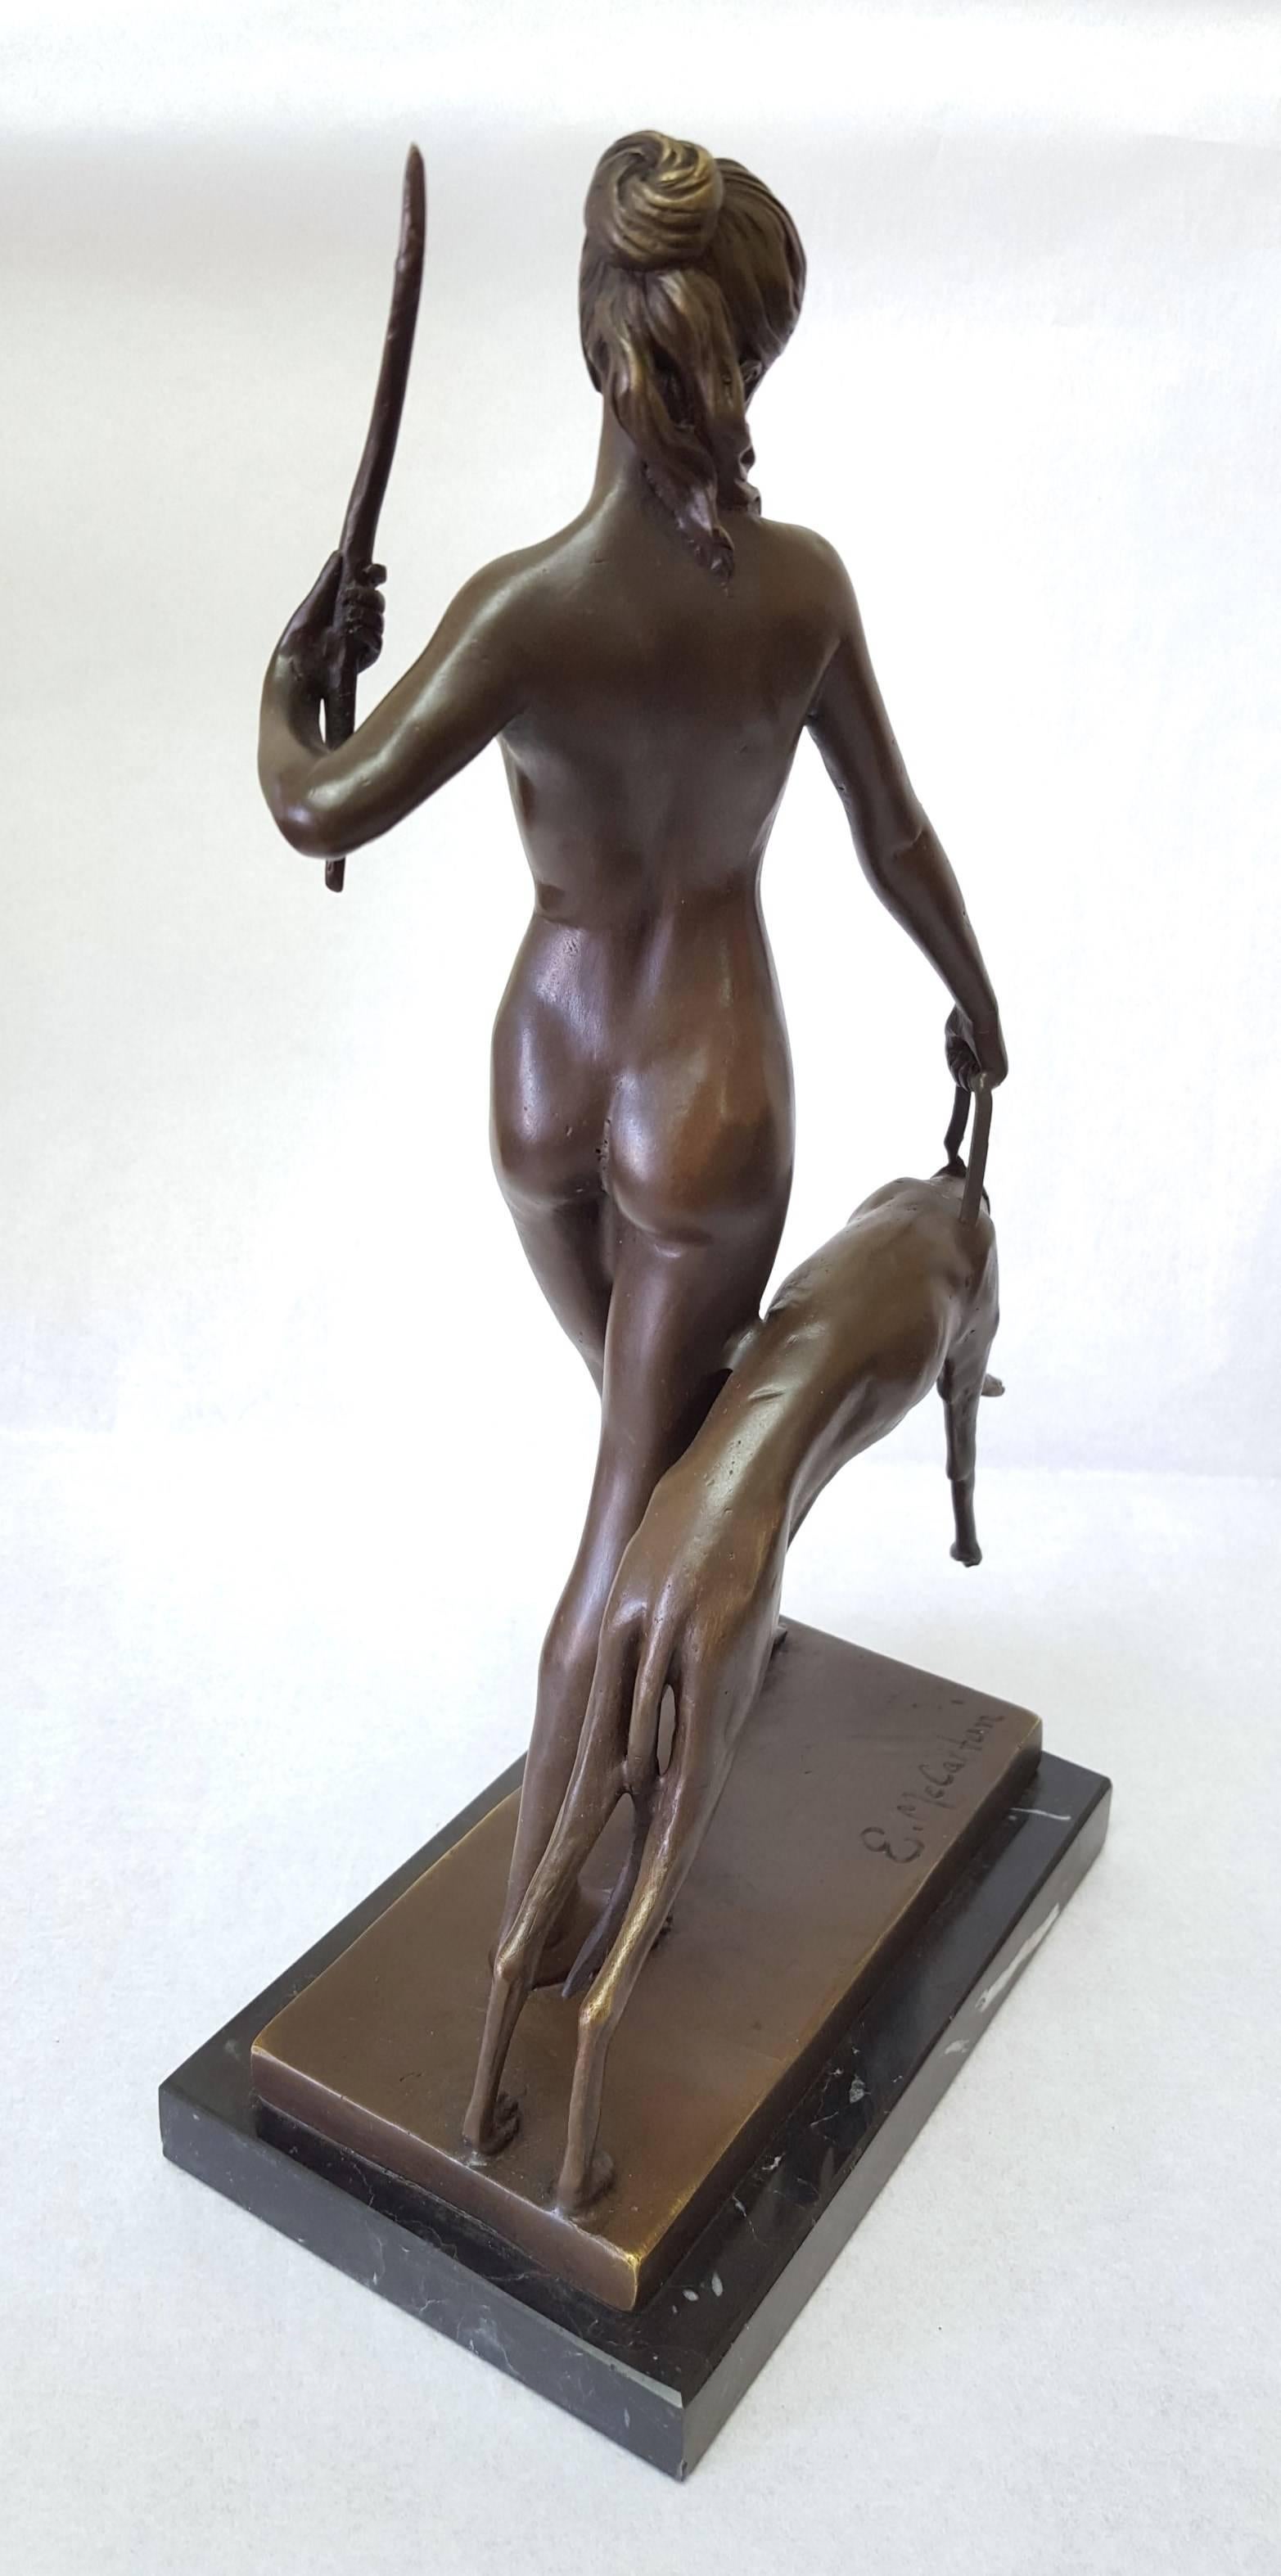 A contemporary recast from the original bronze by American artist Edward McCartan (1879-1947) titled 